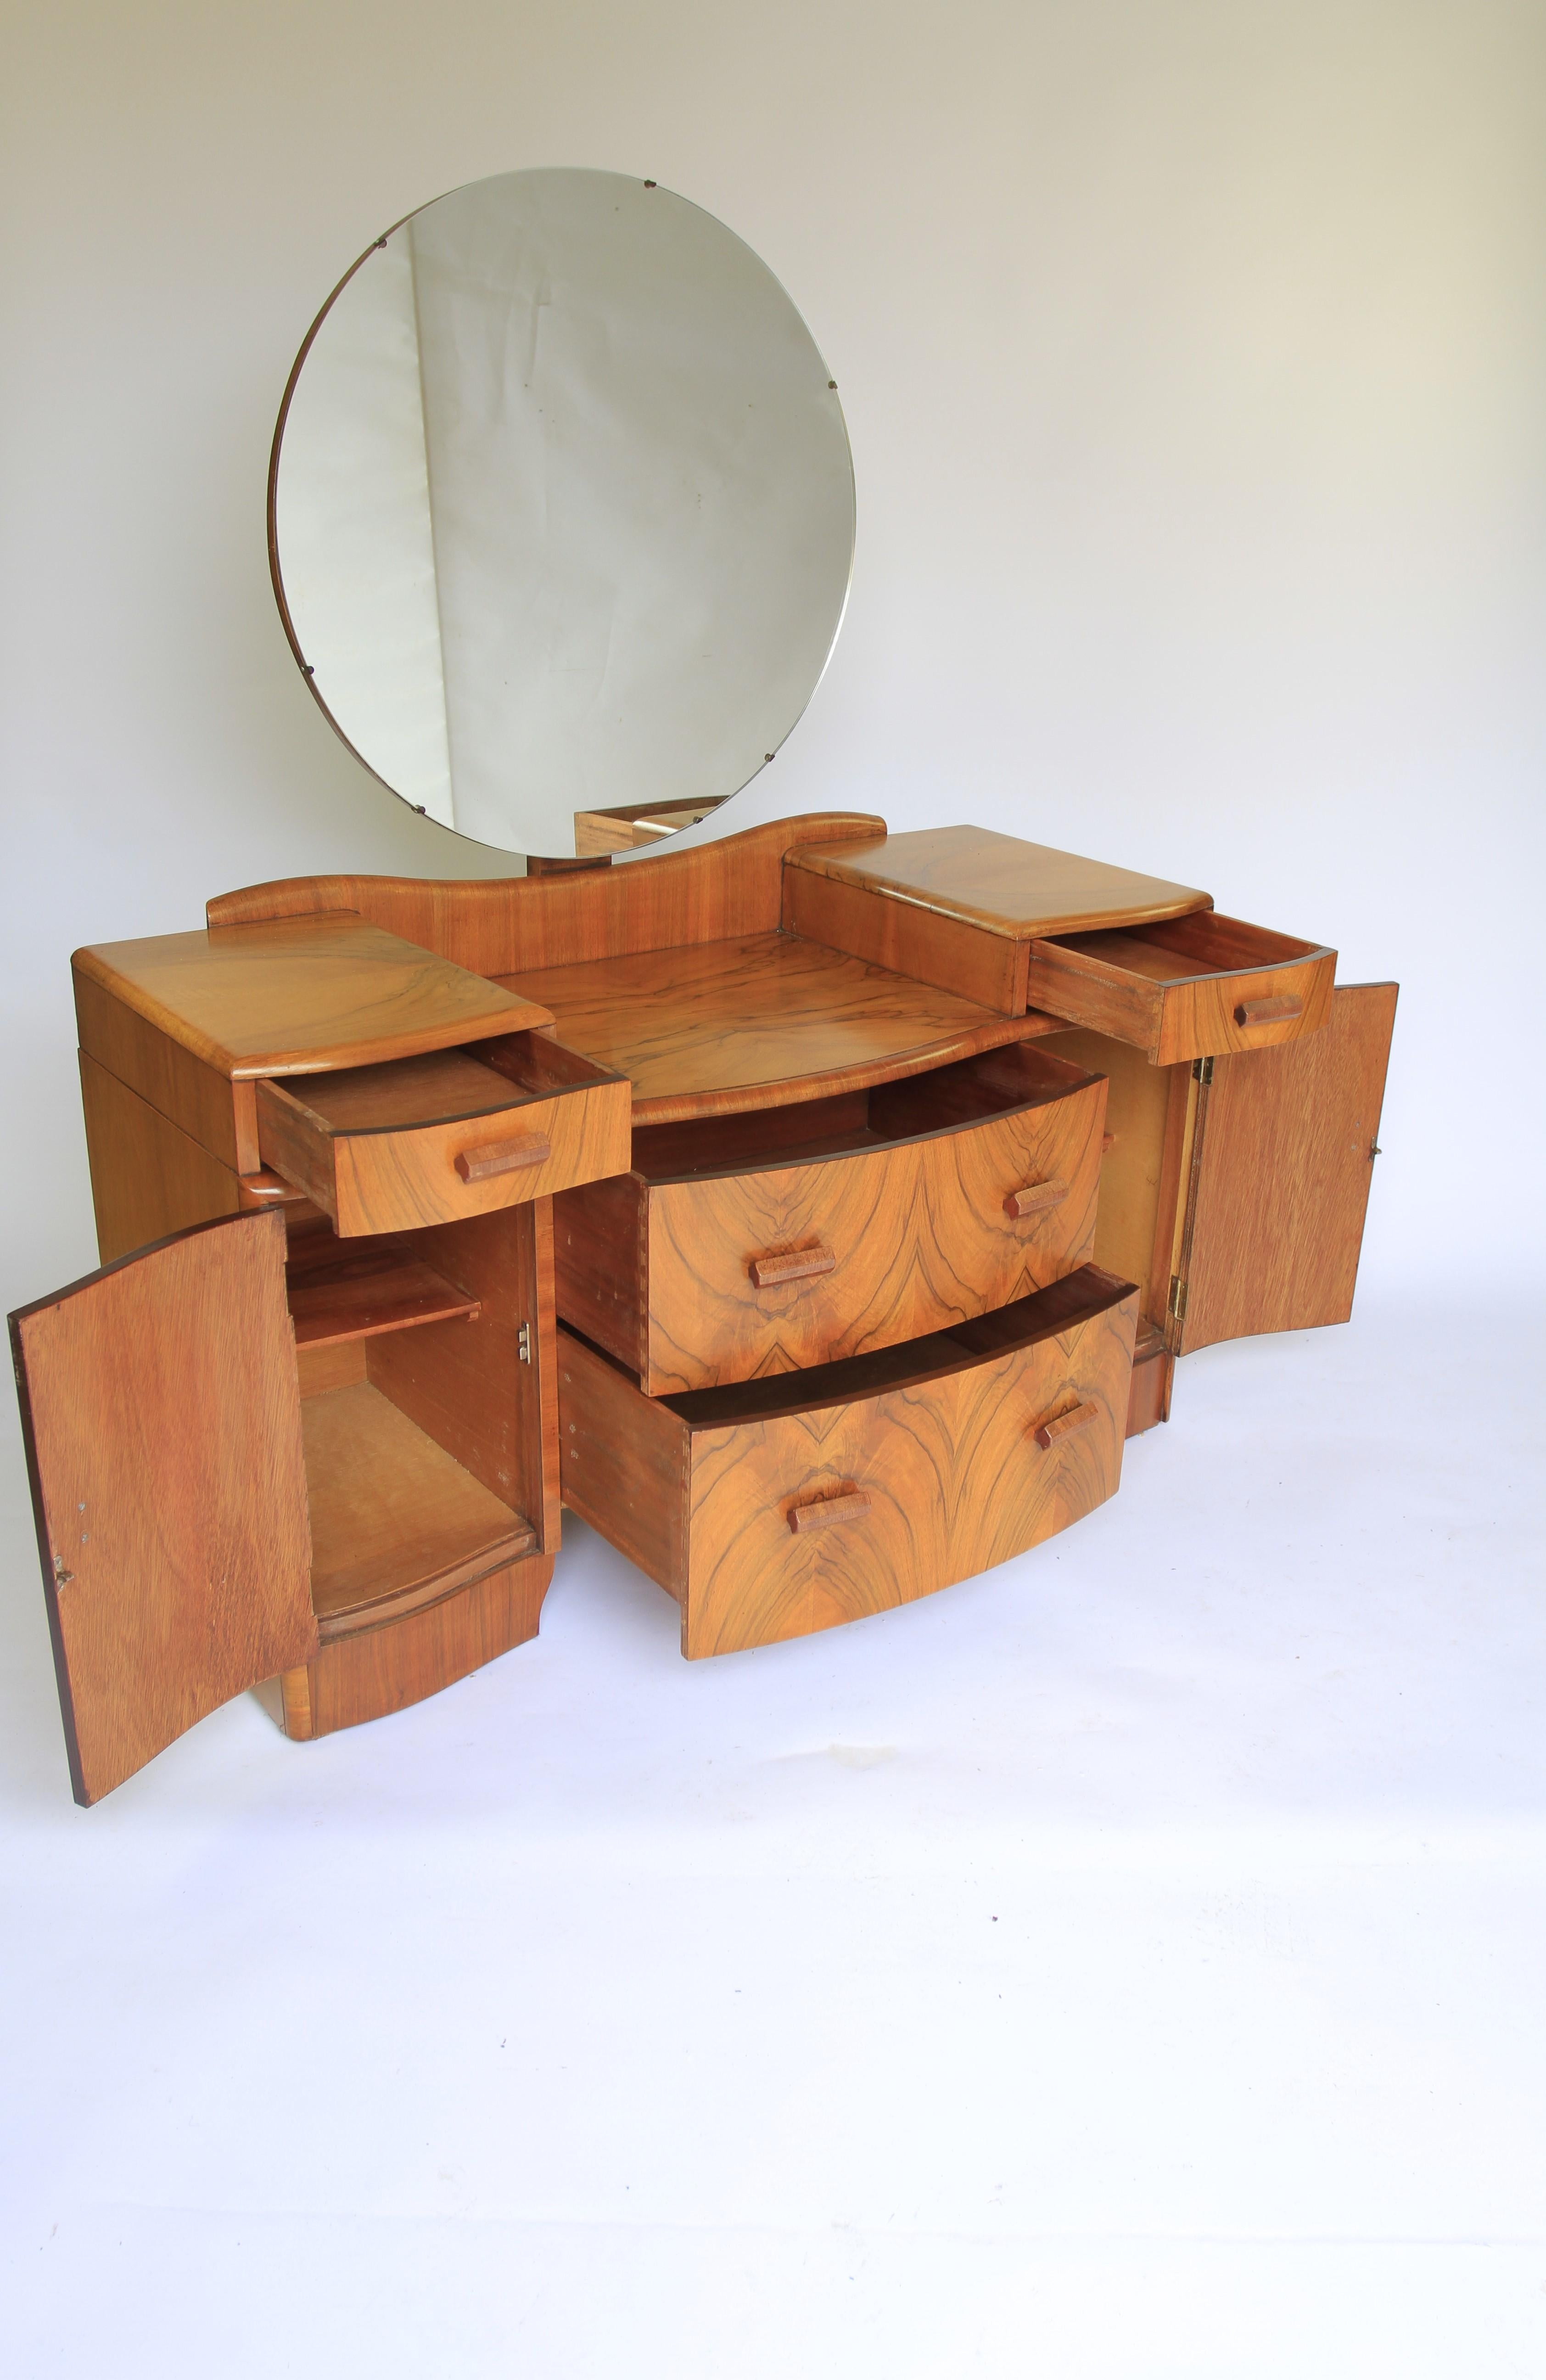 Polished Art Deco Walnut Dressing Table circa 1930s For Sale